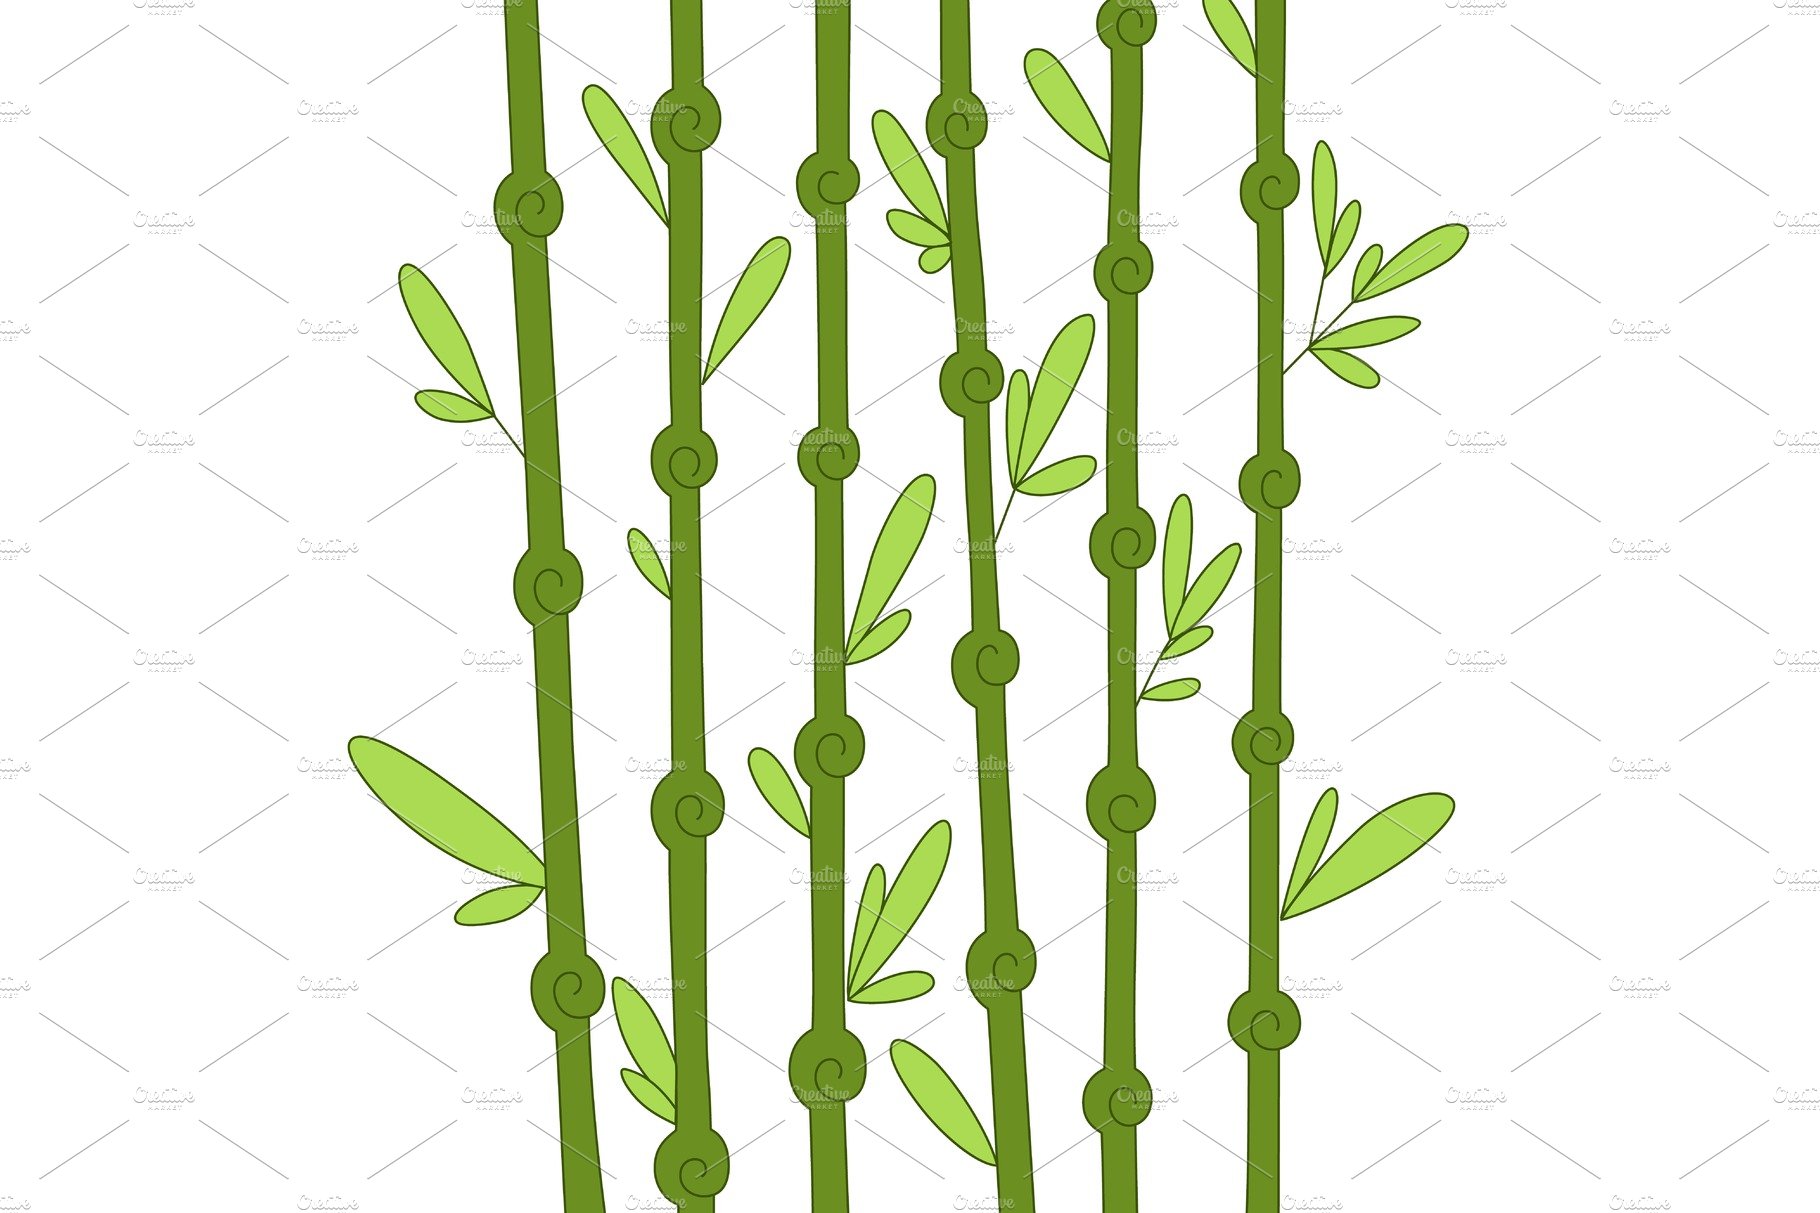 Drawing of a bamboo plant on a white background.